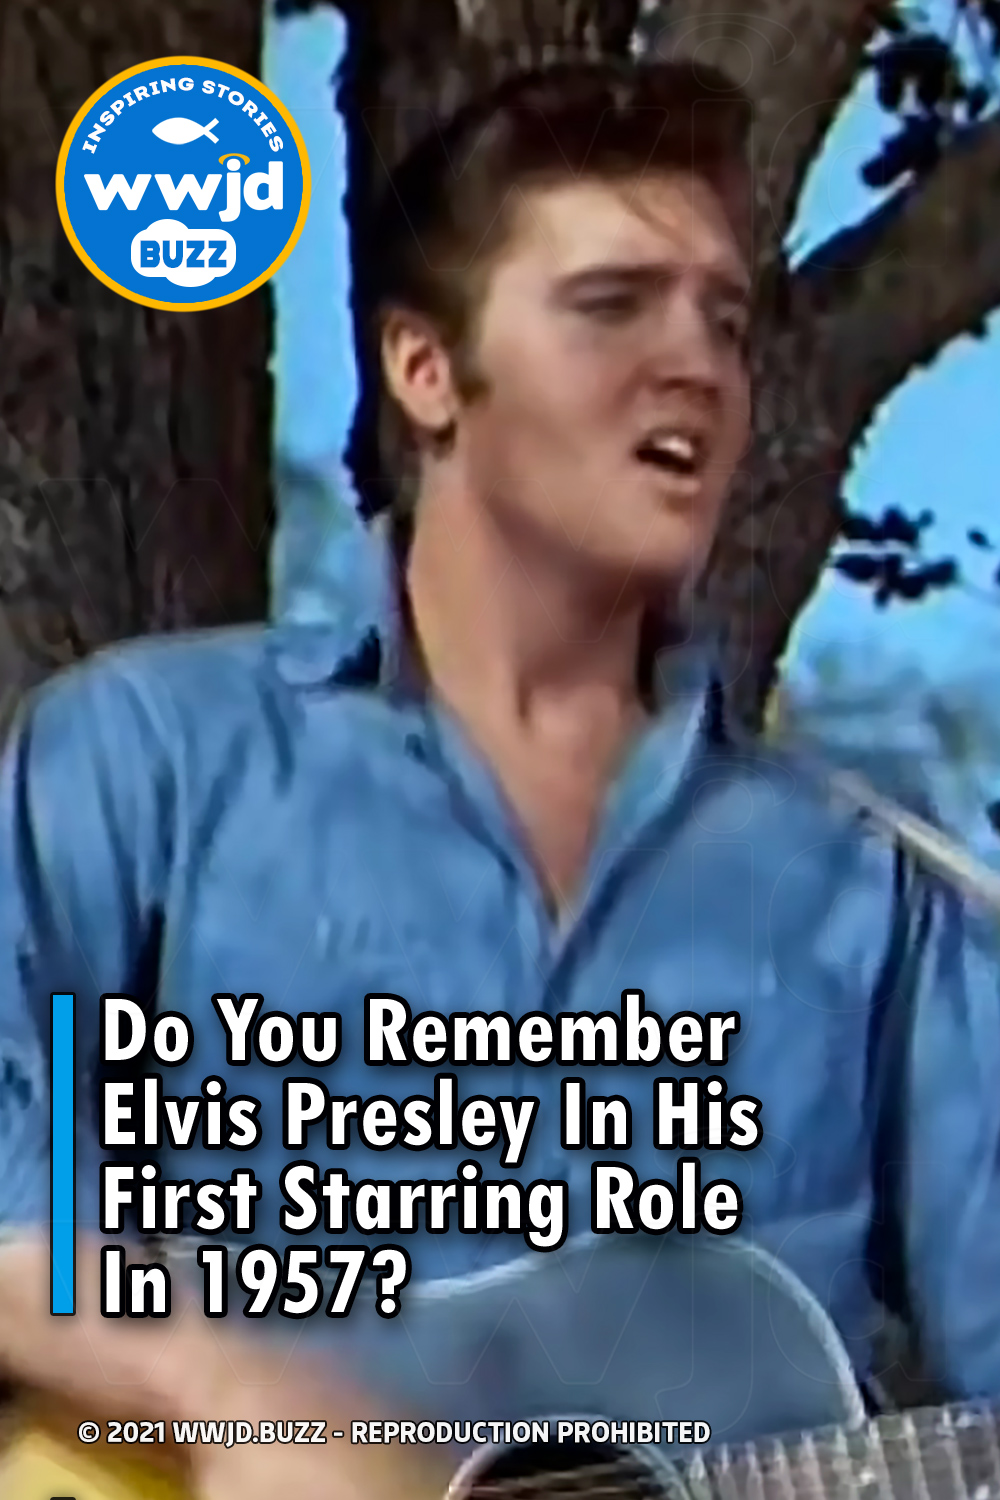 Do You Remember Elvis Presley In His First Starring Role In 1957?